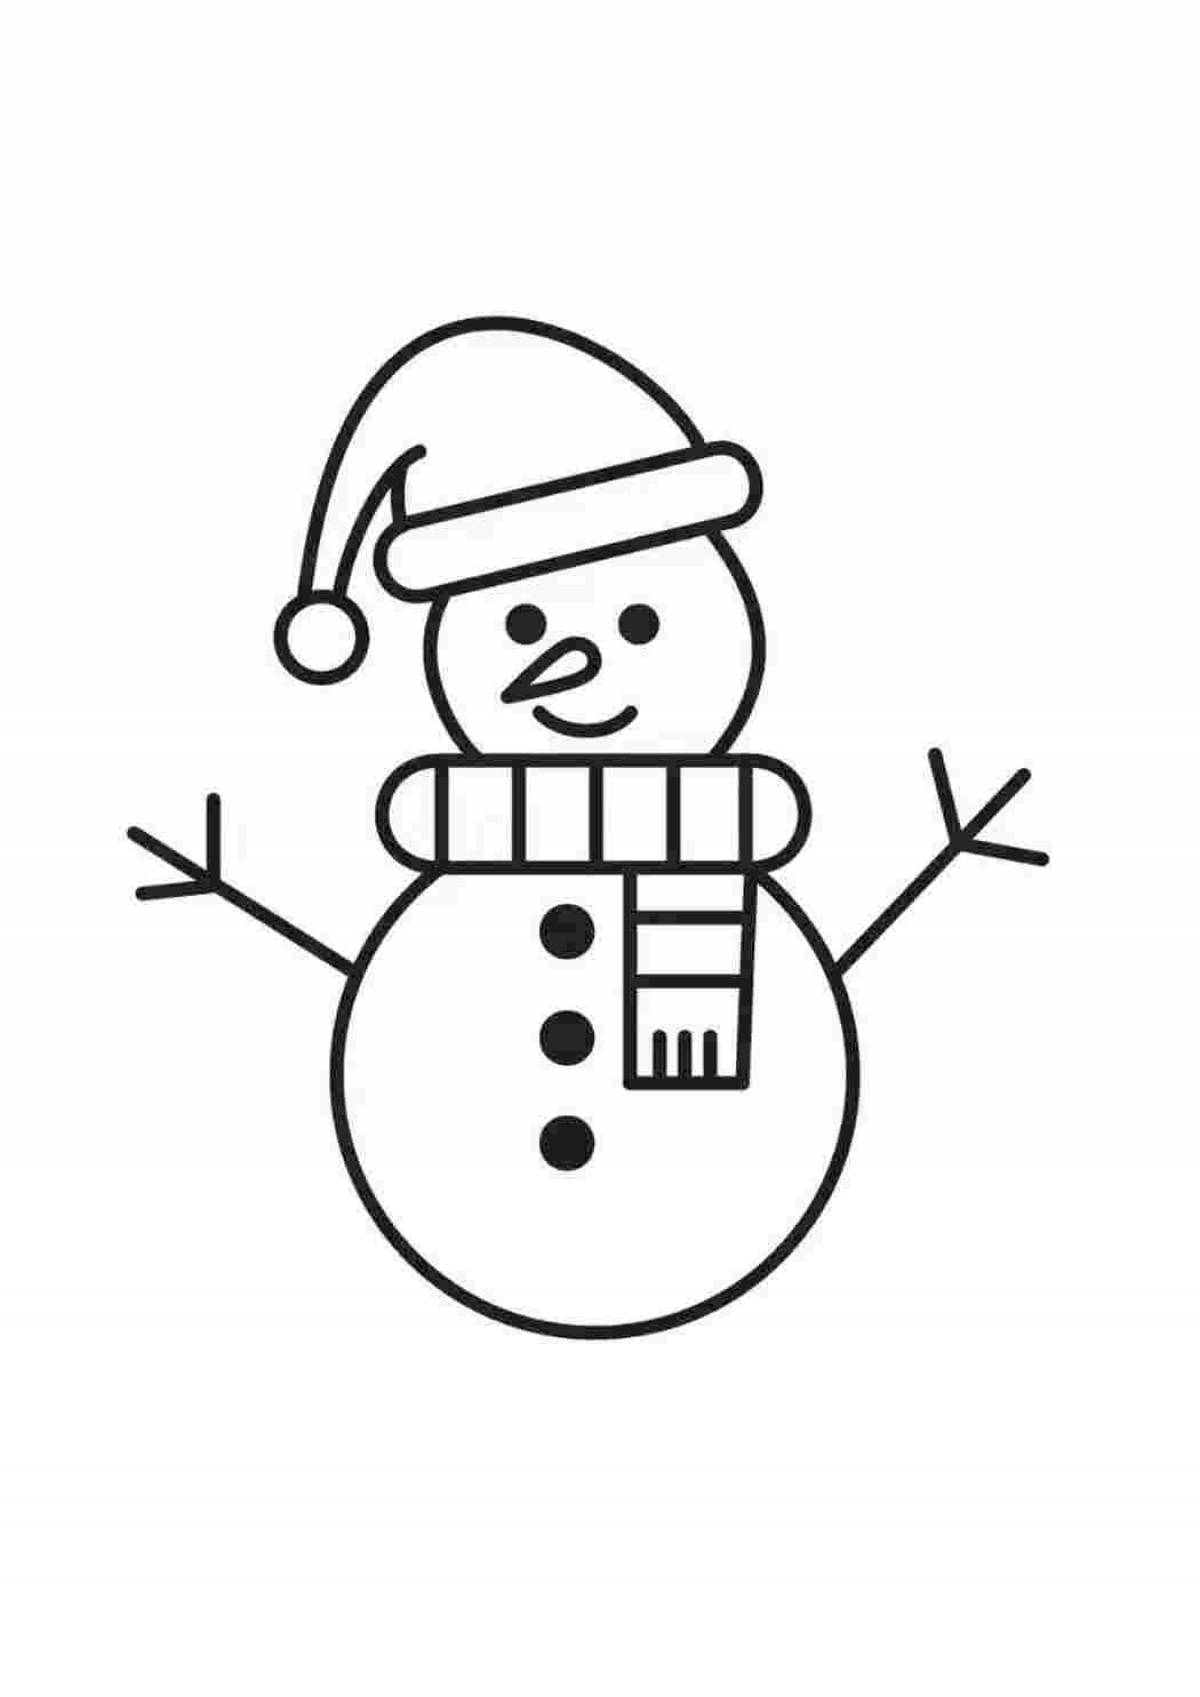 Snowman without nose #6